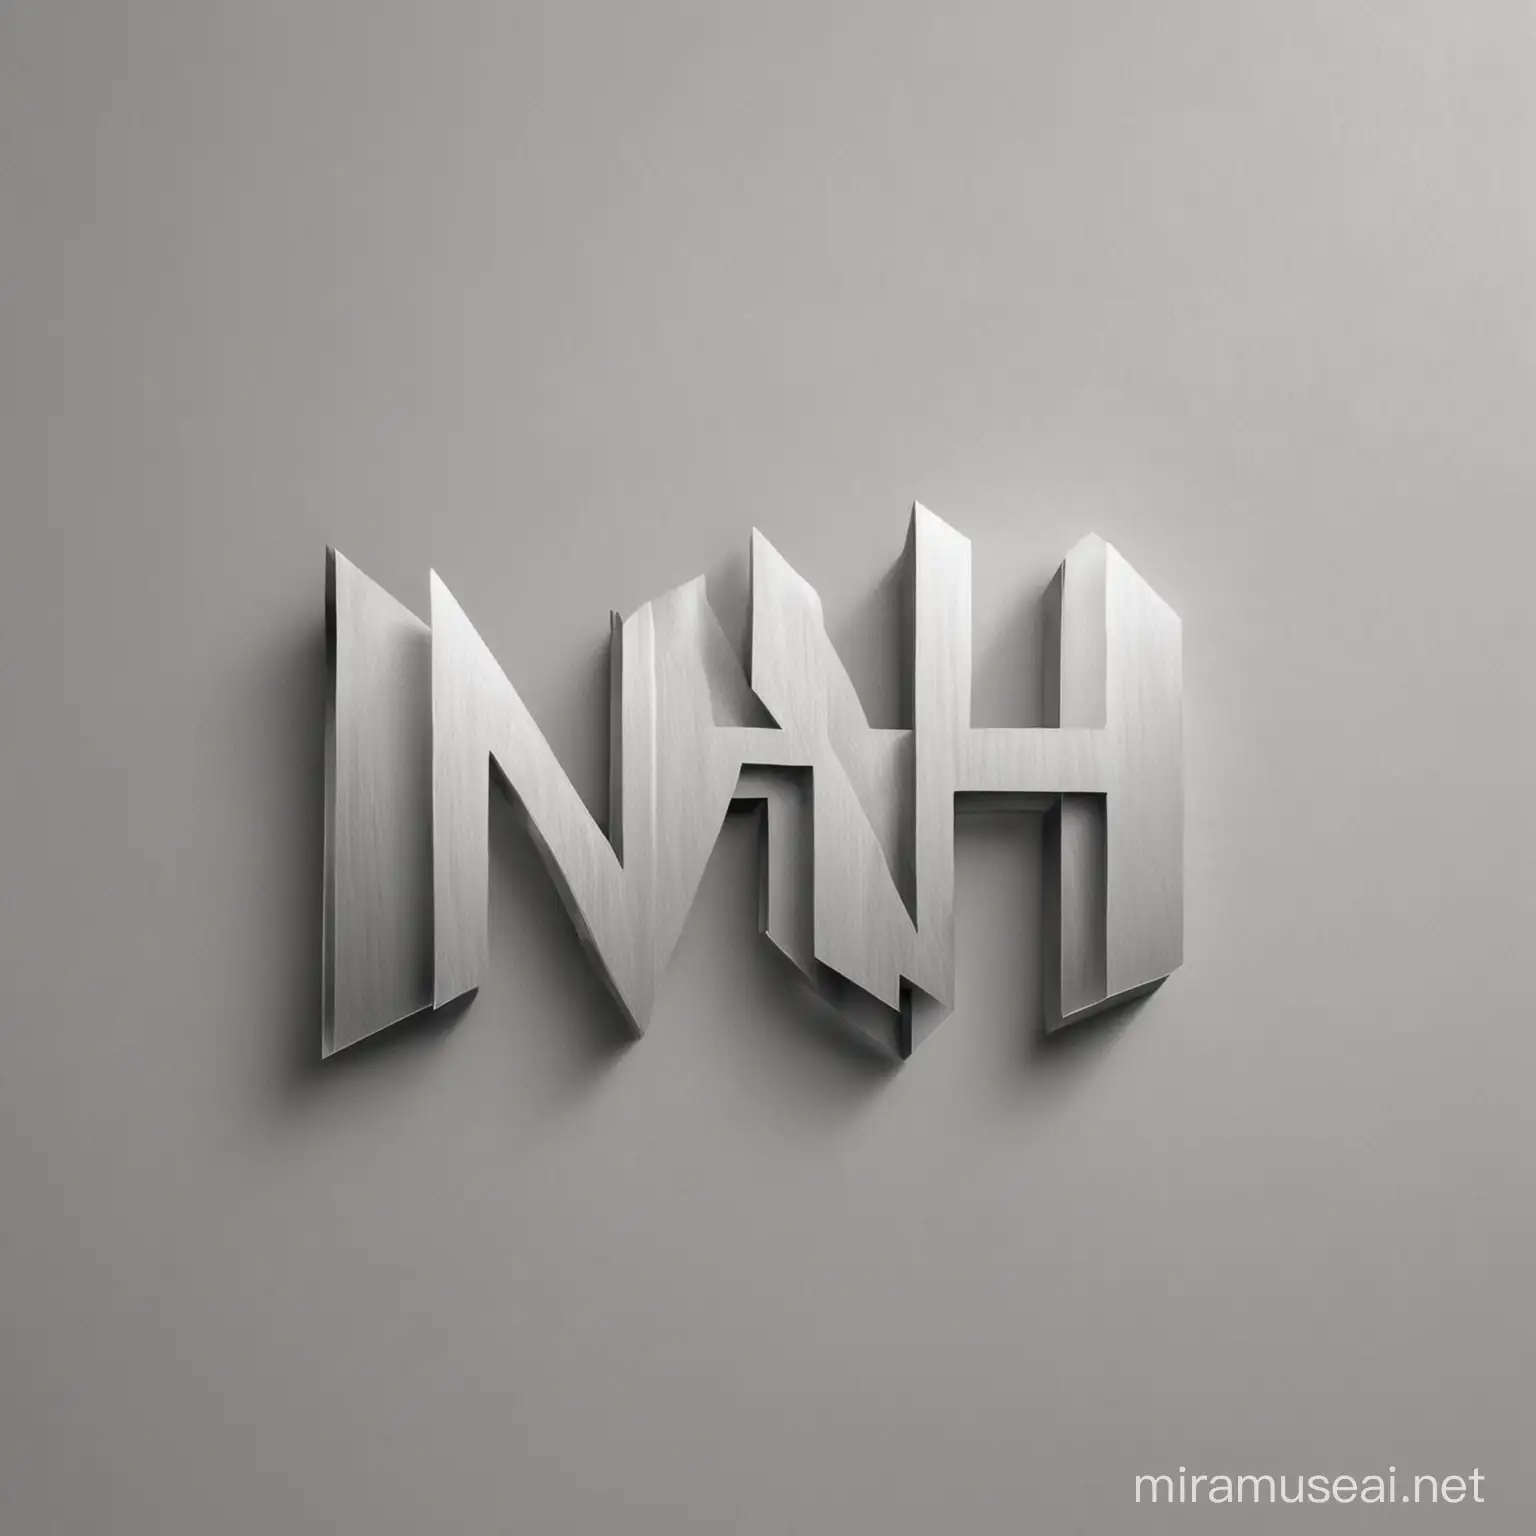 generate me a logo with the word NH and the background must be Gray and light
